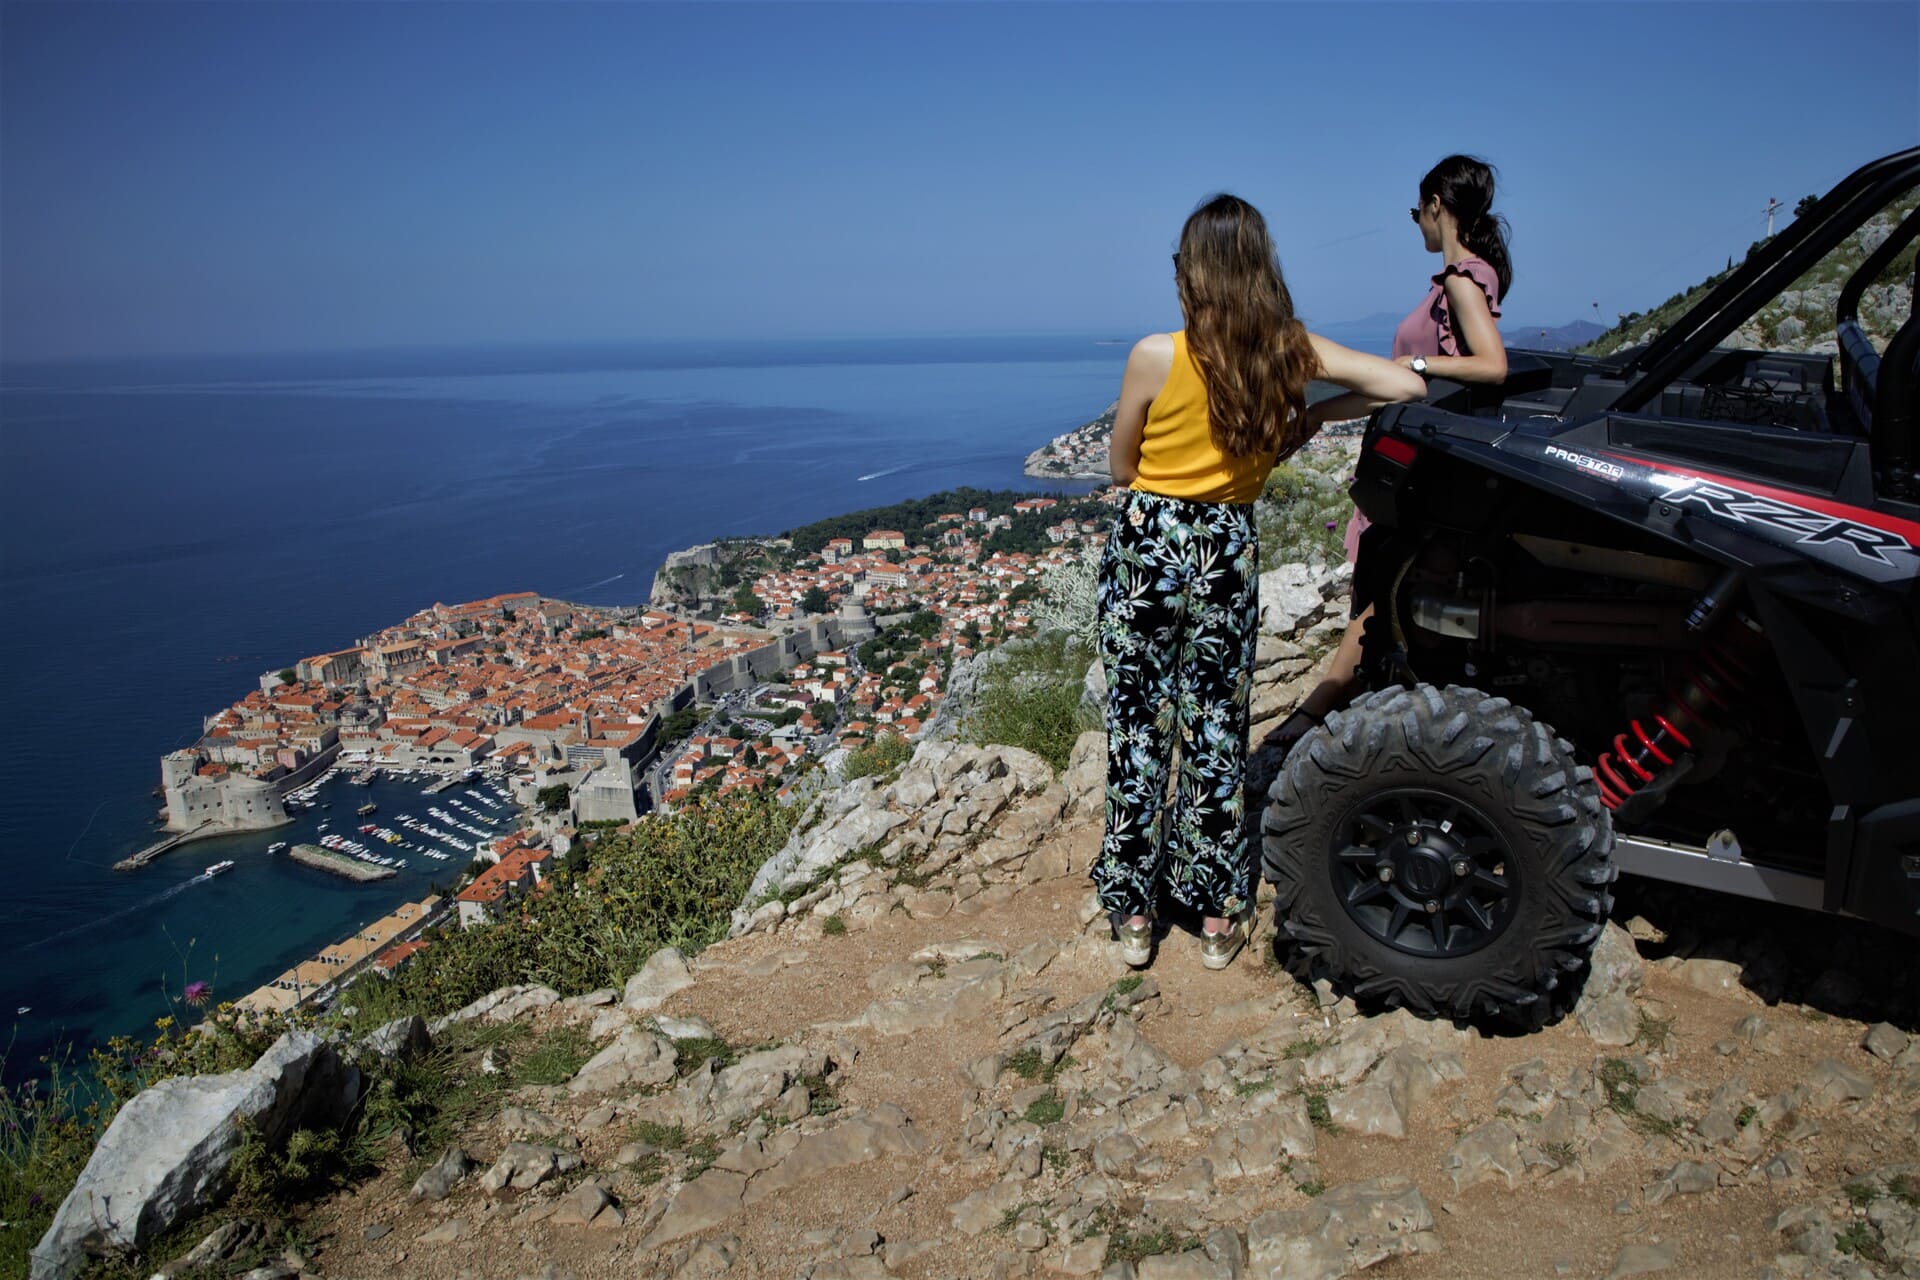 OUR NEW BUGGY ADVENTURE – the ride, the views, the local experience!